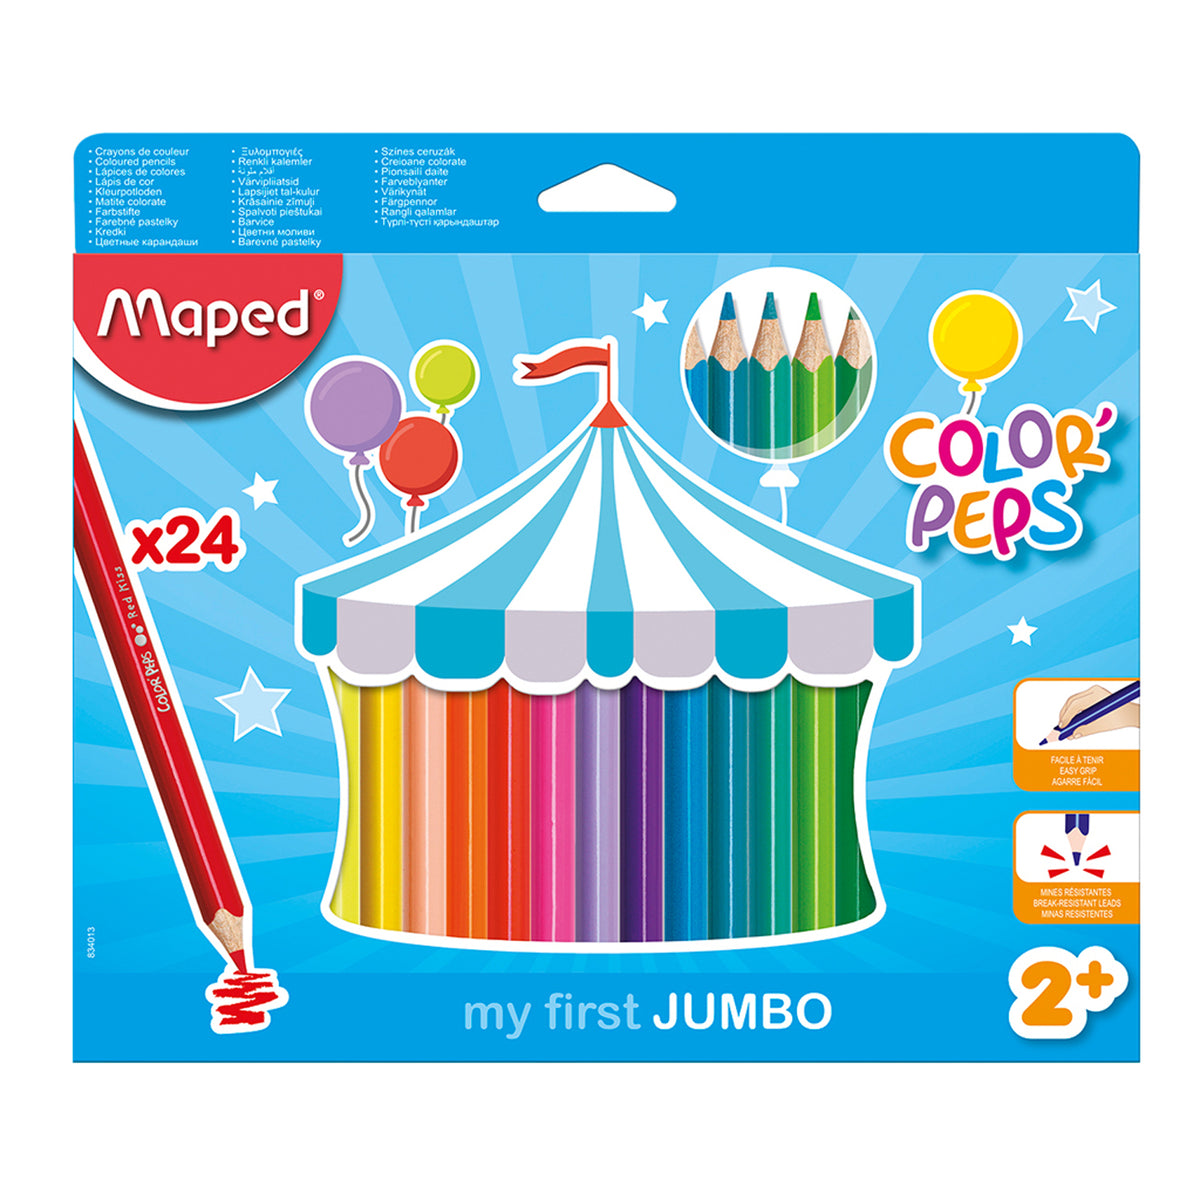 Maped Color'Peps Colored Pencils - Set of 24